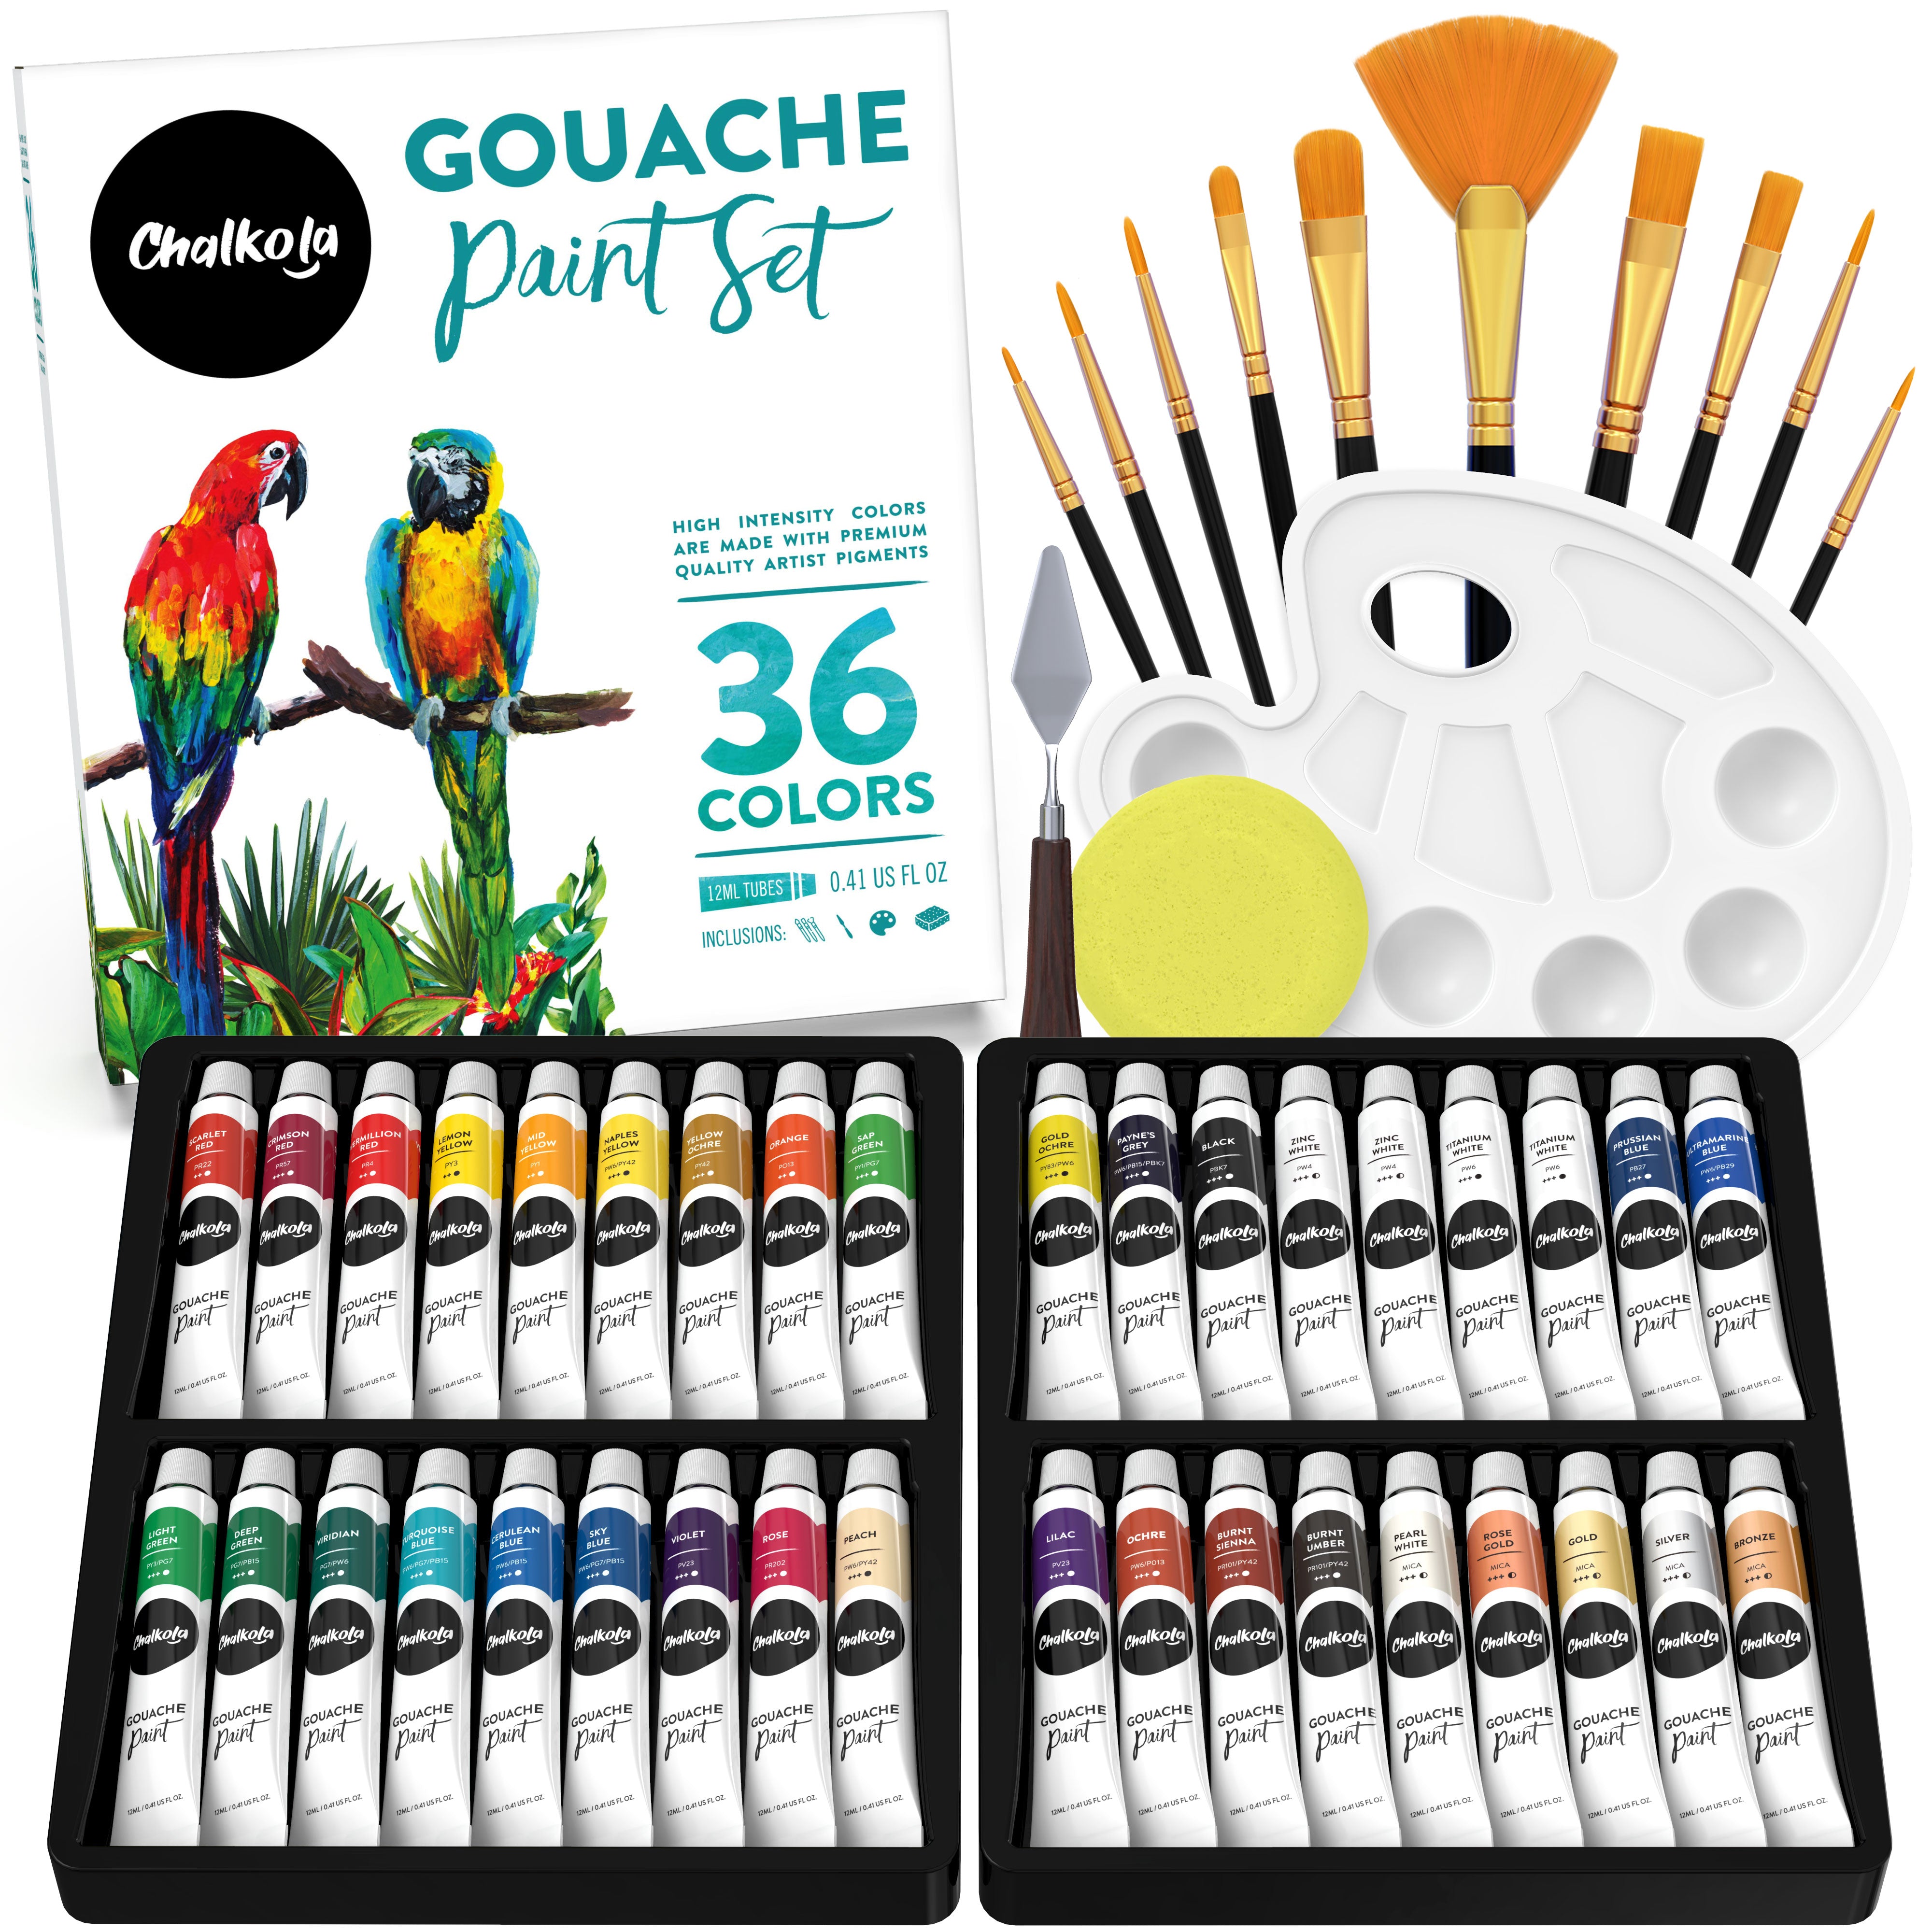 20 Best Gouache Paints for Beginners and Experts  Gouache paint set, Best  gouache paint, Painting